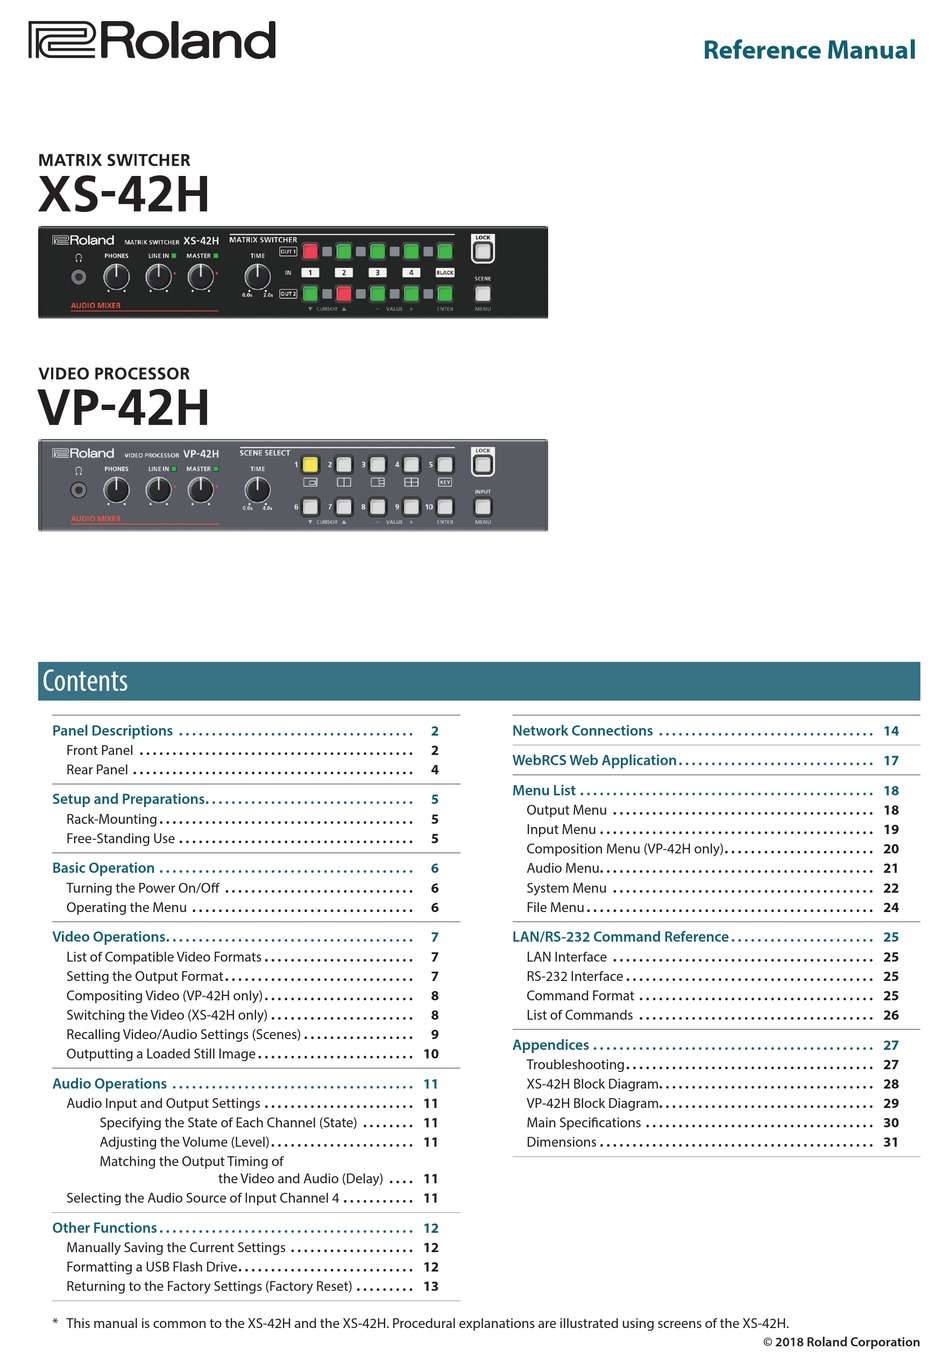 ROLAND XS-42H REFERENCE MANUAL Pdf Download